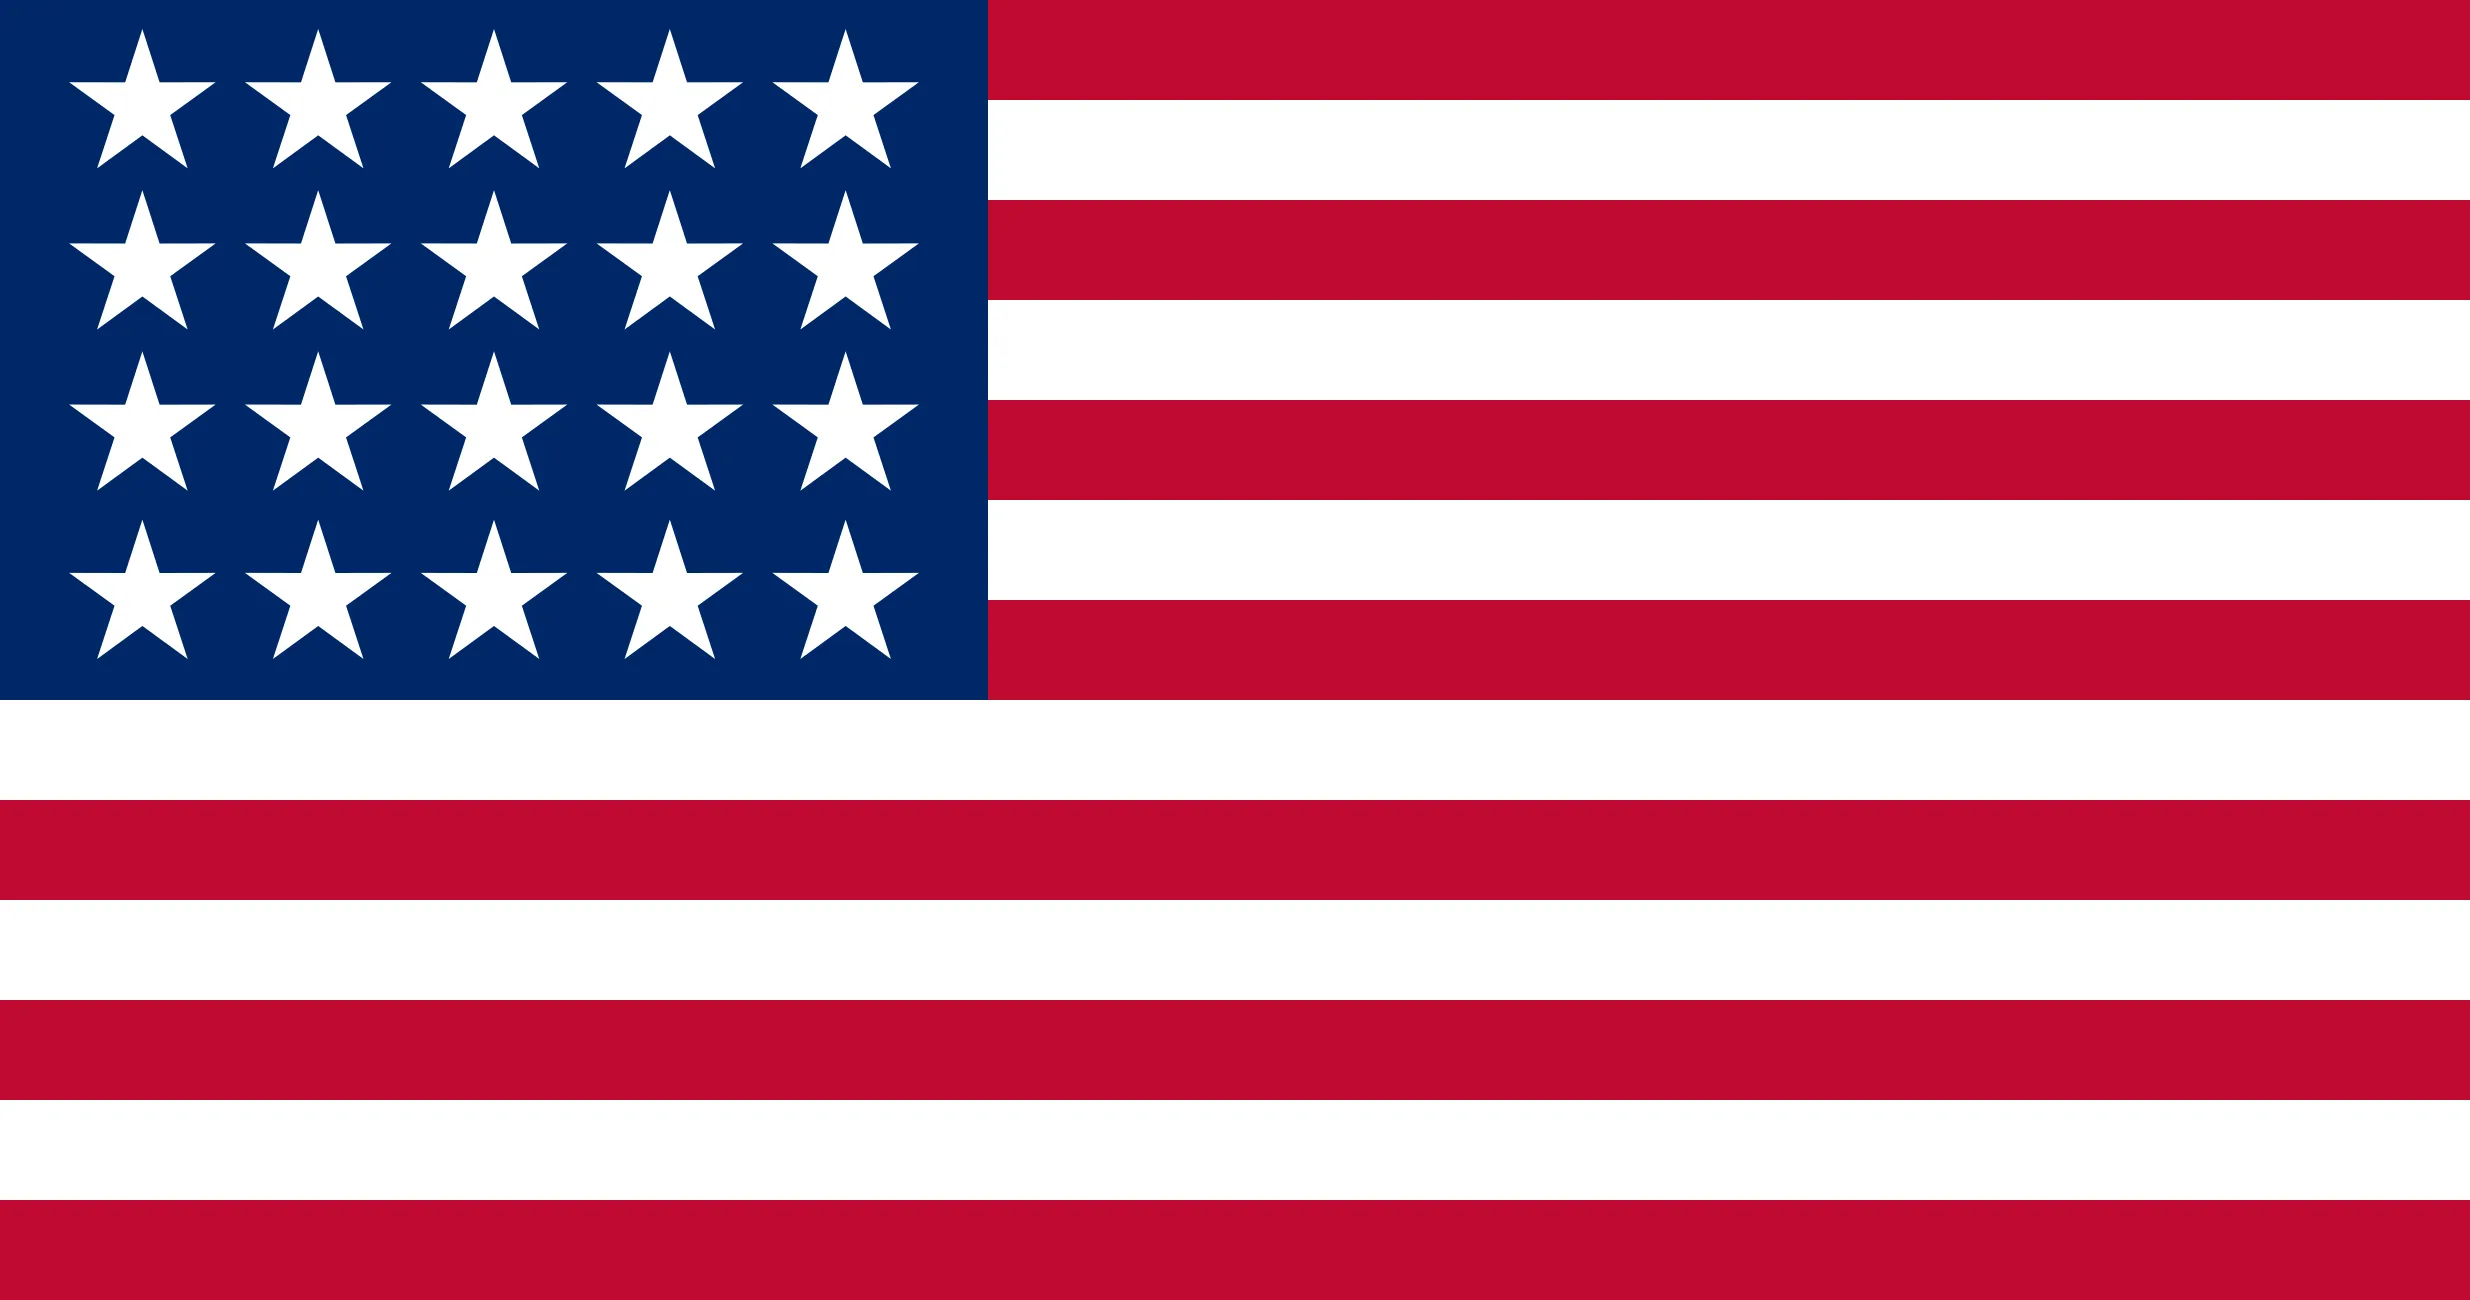 US Flag with 29 stars